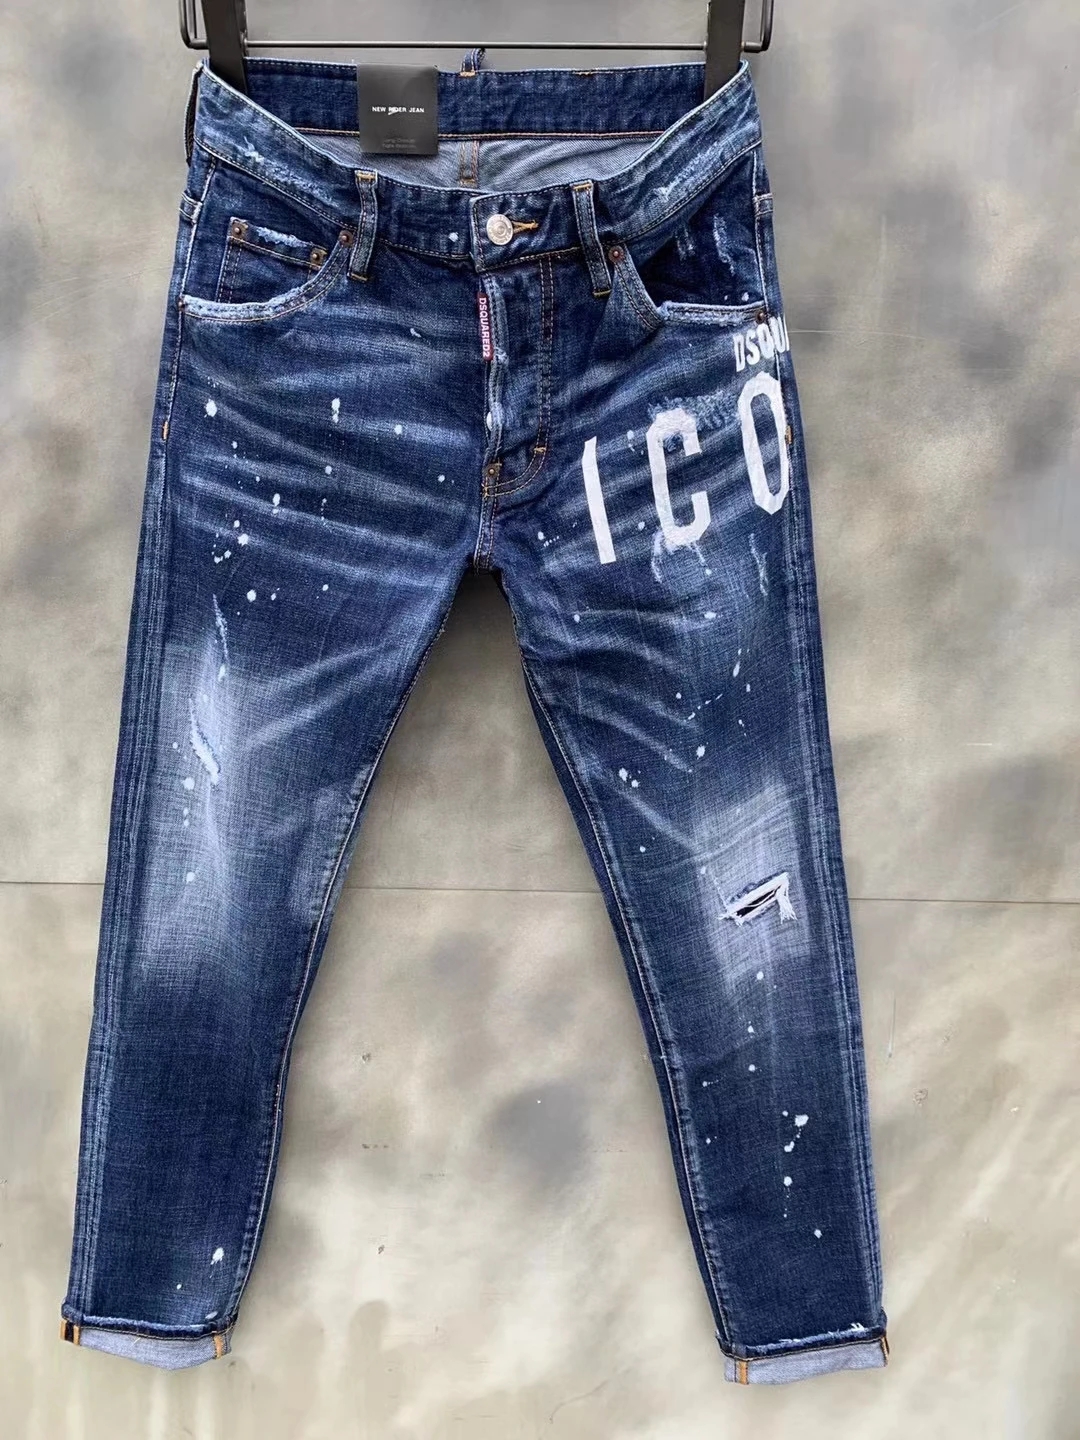 relaxed fit jeans 2021 Nnew Style Dsquared2 Fashion Motorcycle Ripped Paint Dot men's Jeans 020 mens stretch jeans Jeans